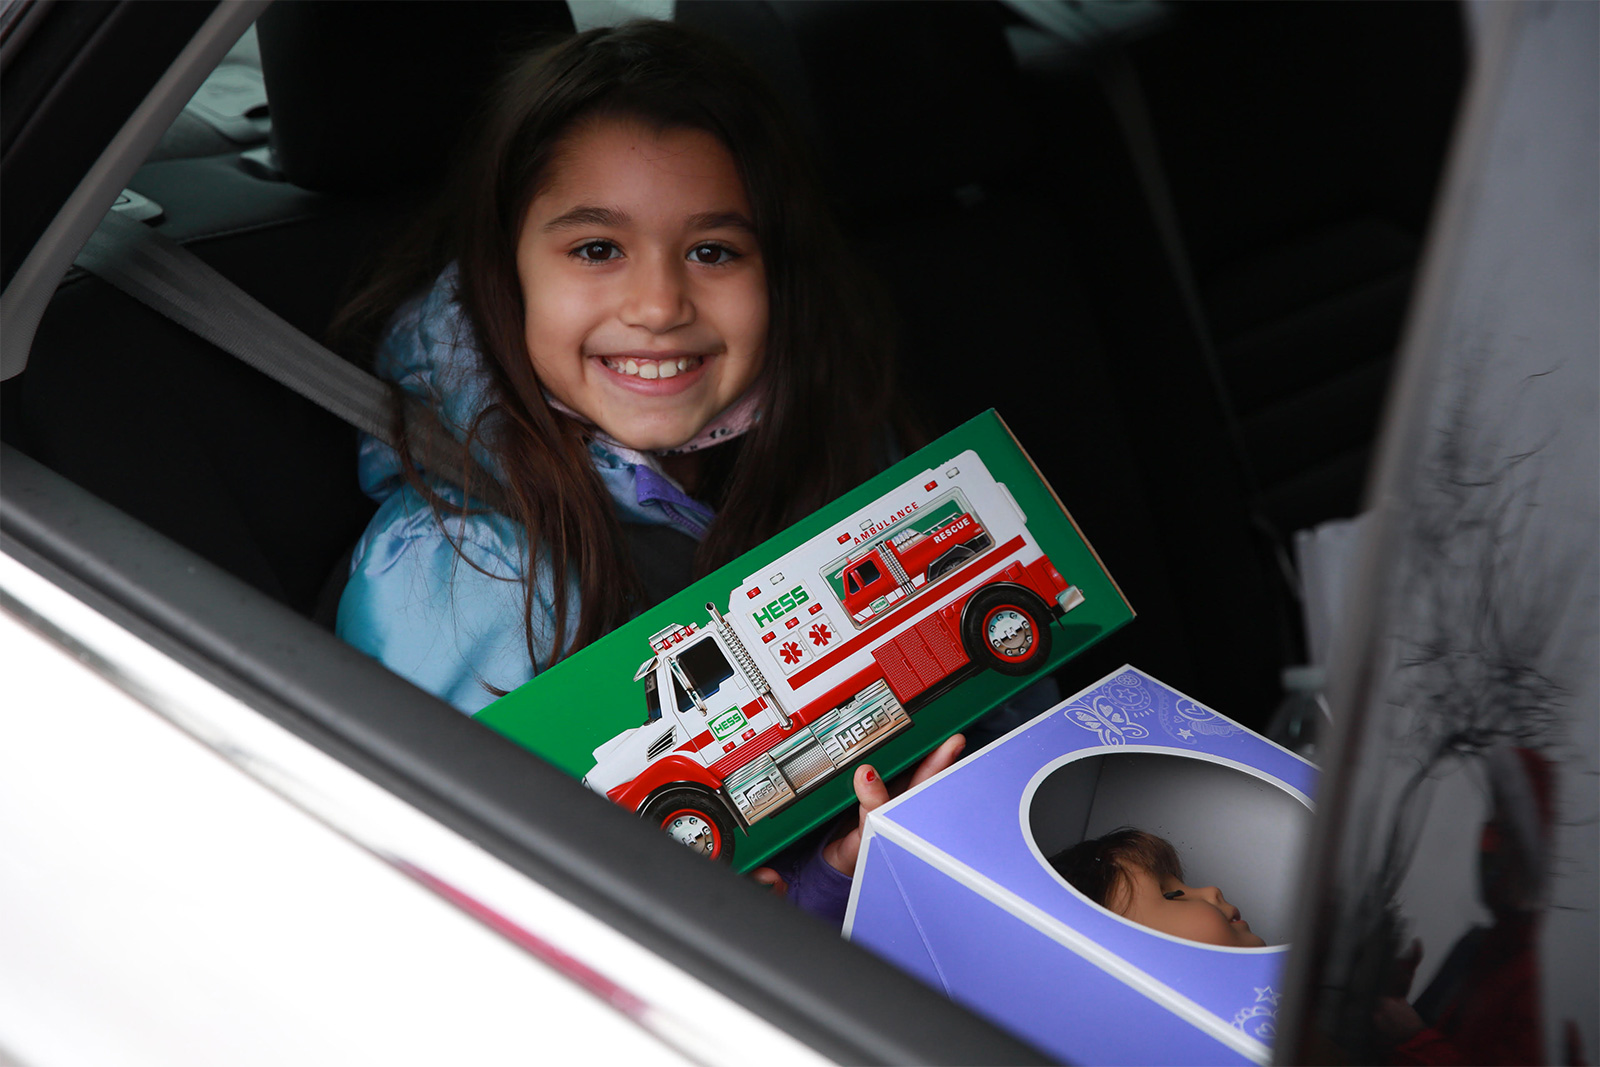 Our annual Toy Express program is moving full steam ahead…